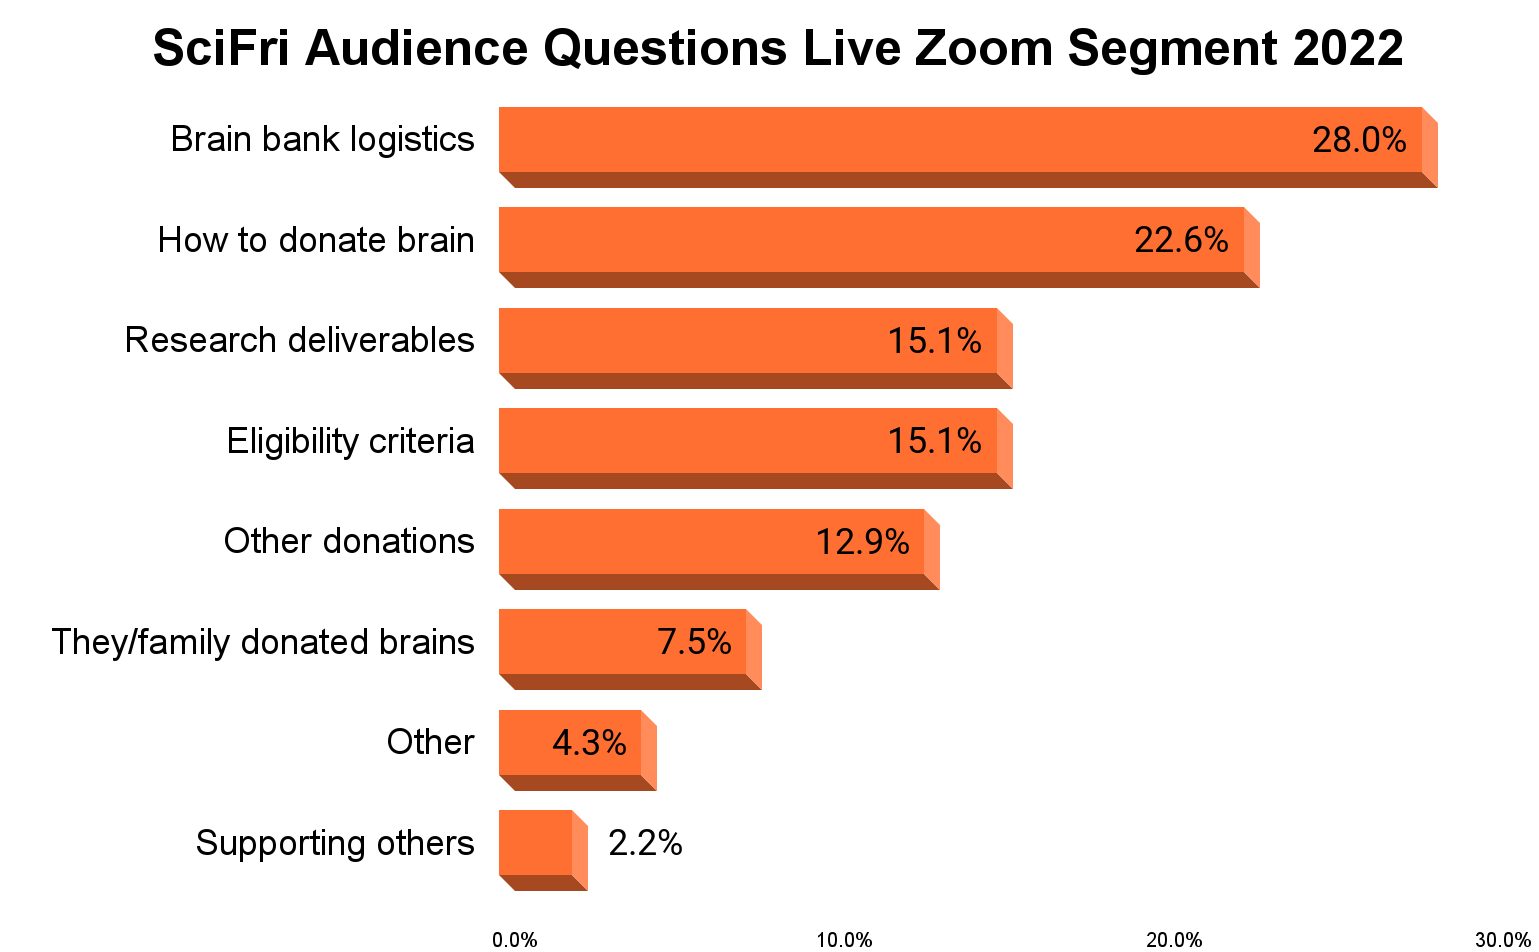 Drop-down chart depicting questions from the live Zoom segment, including brain bank logistics (28.0%), how to donate a brain (22.6%), research results (15.1%), eligibility criteria (15, 1%), other donations (12.9%), they/family donated brains (7.5%), others (4.3%), support of others (2.2%)